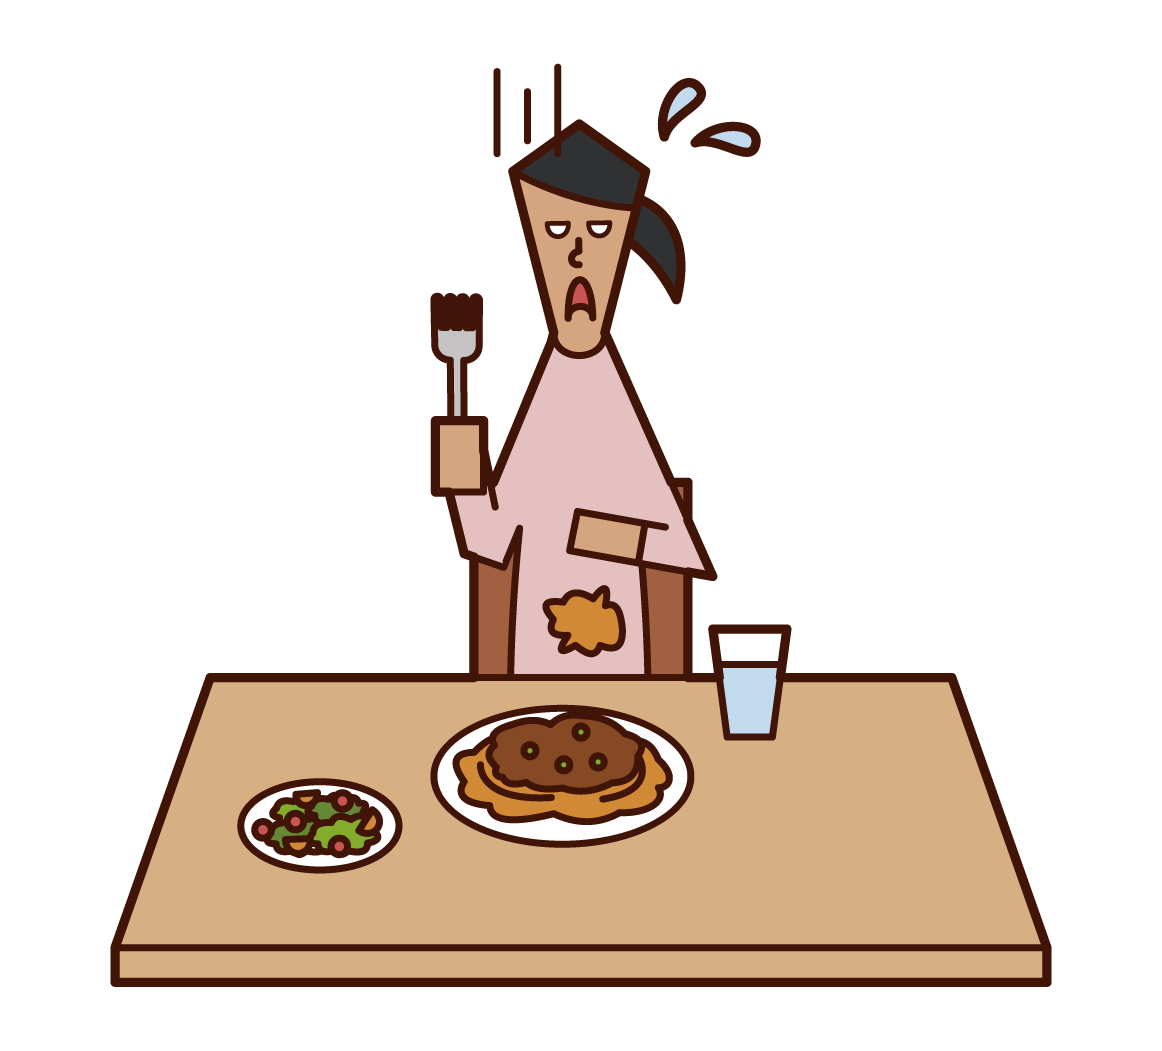 Illustration of a woman who spilled food and soiled her clothes